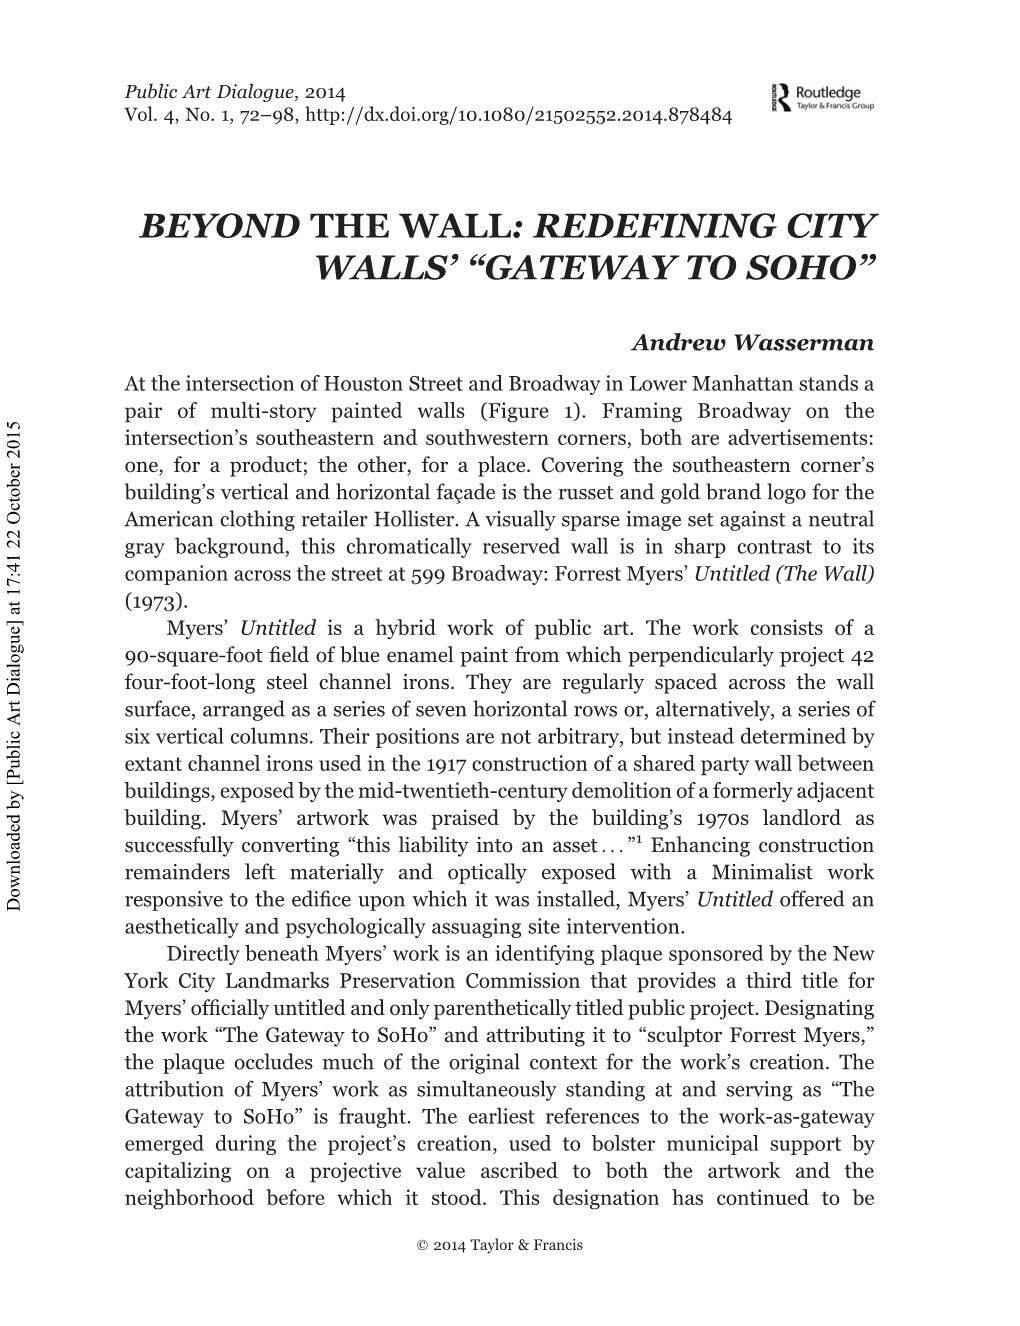 Beyond the Wall: Redefining City Walls' “Gateway to Soho”